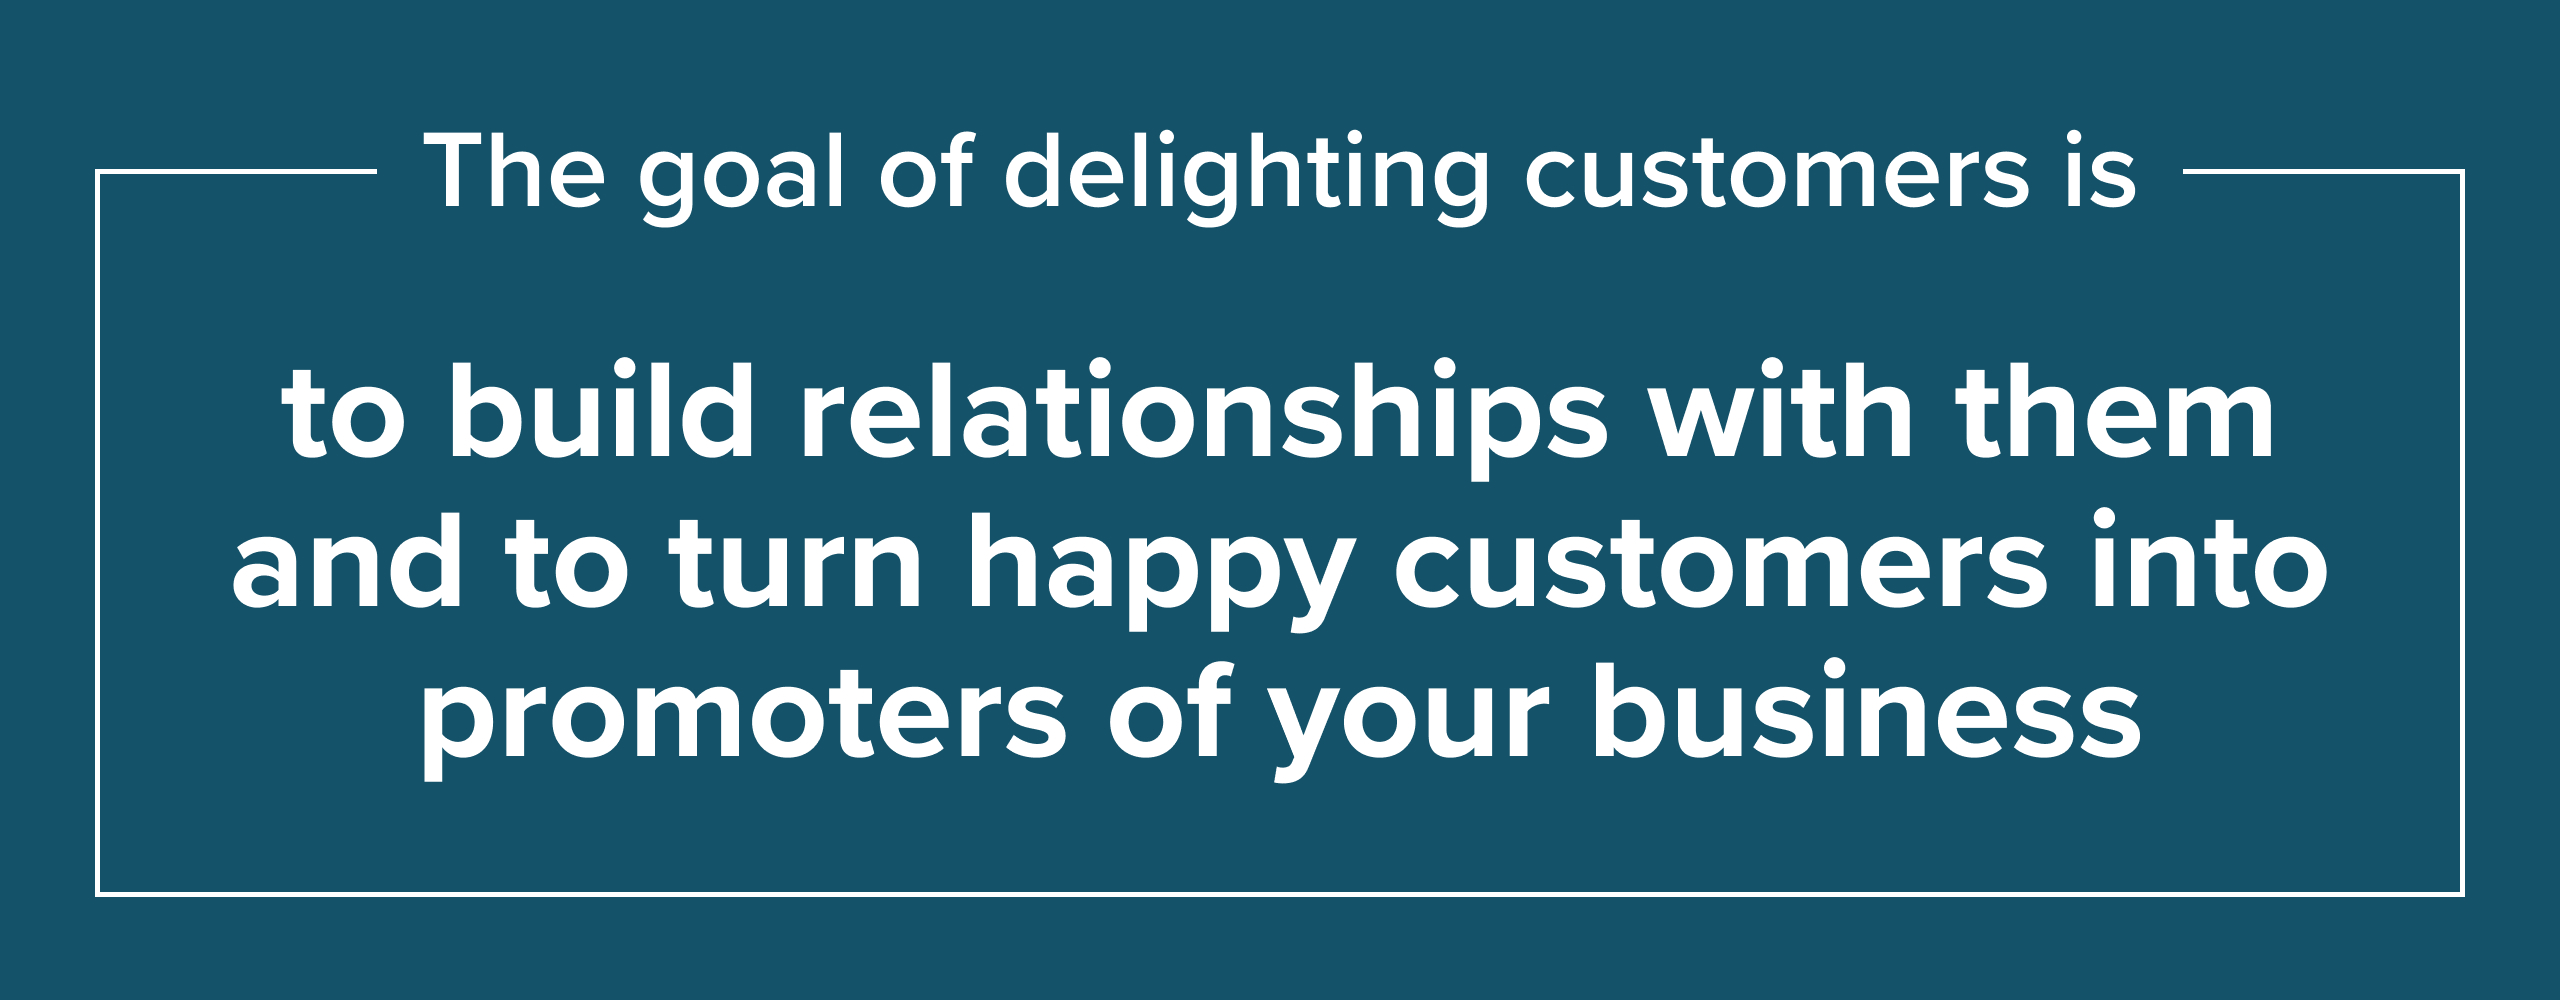 the-goal-of-delighting-customers